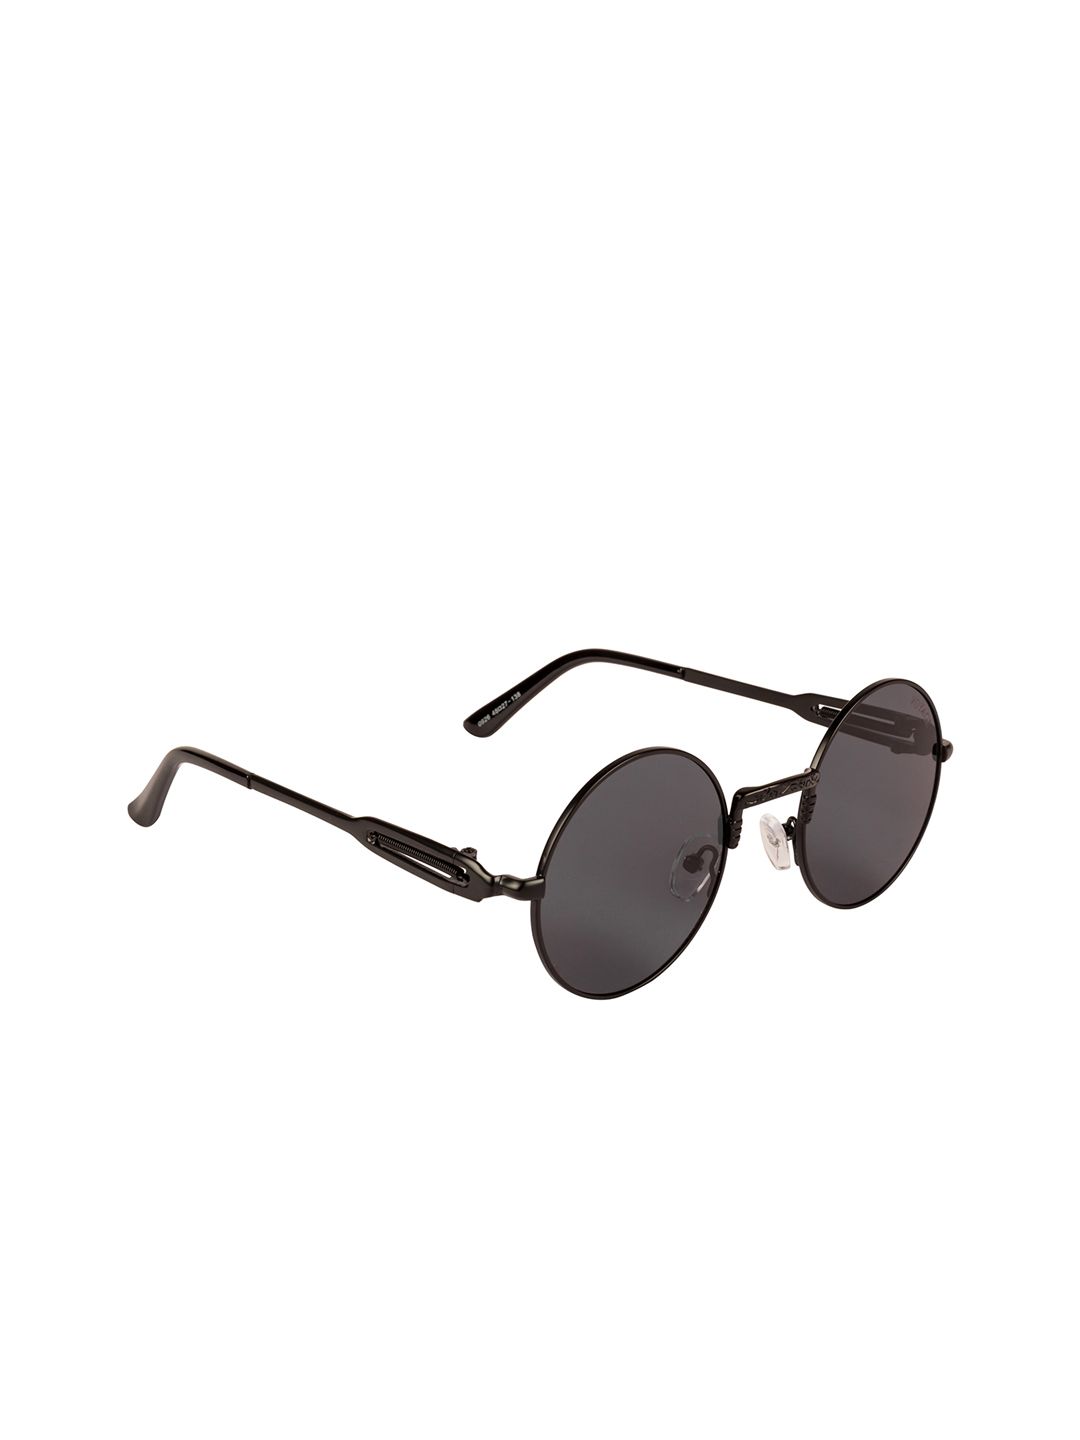 Voyage Unisex Round UV Protected Sunglasses 0926MG3214 Price in India